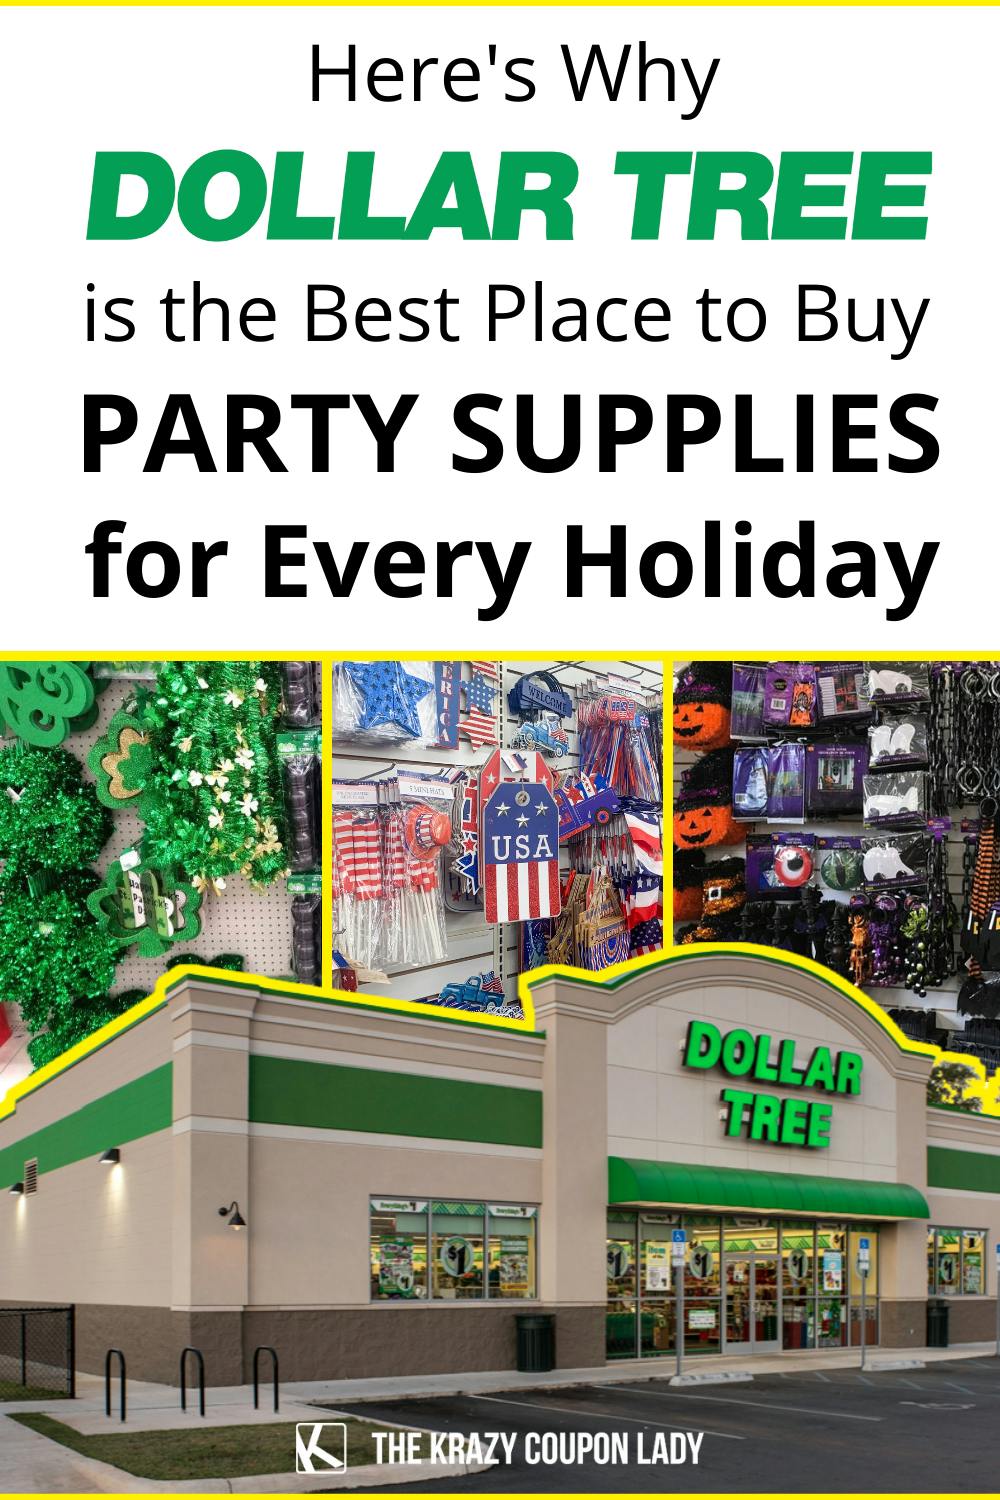 15 Dollar Tree Party Supply Ideas from New Year's to Christmas